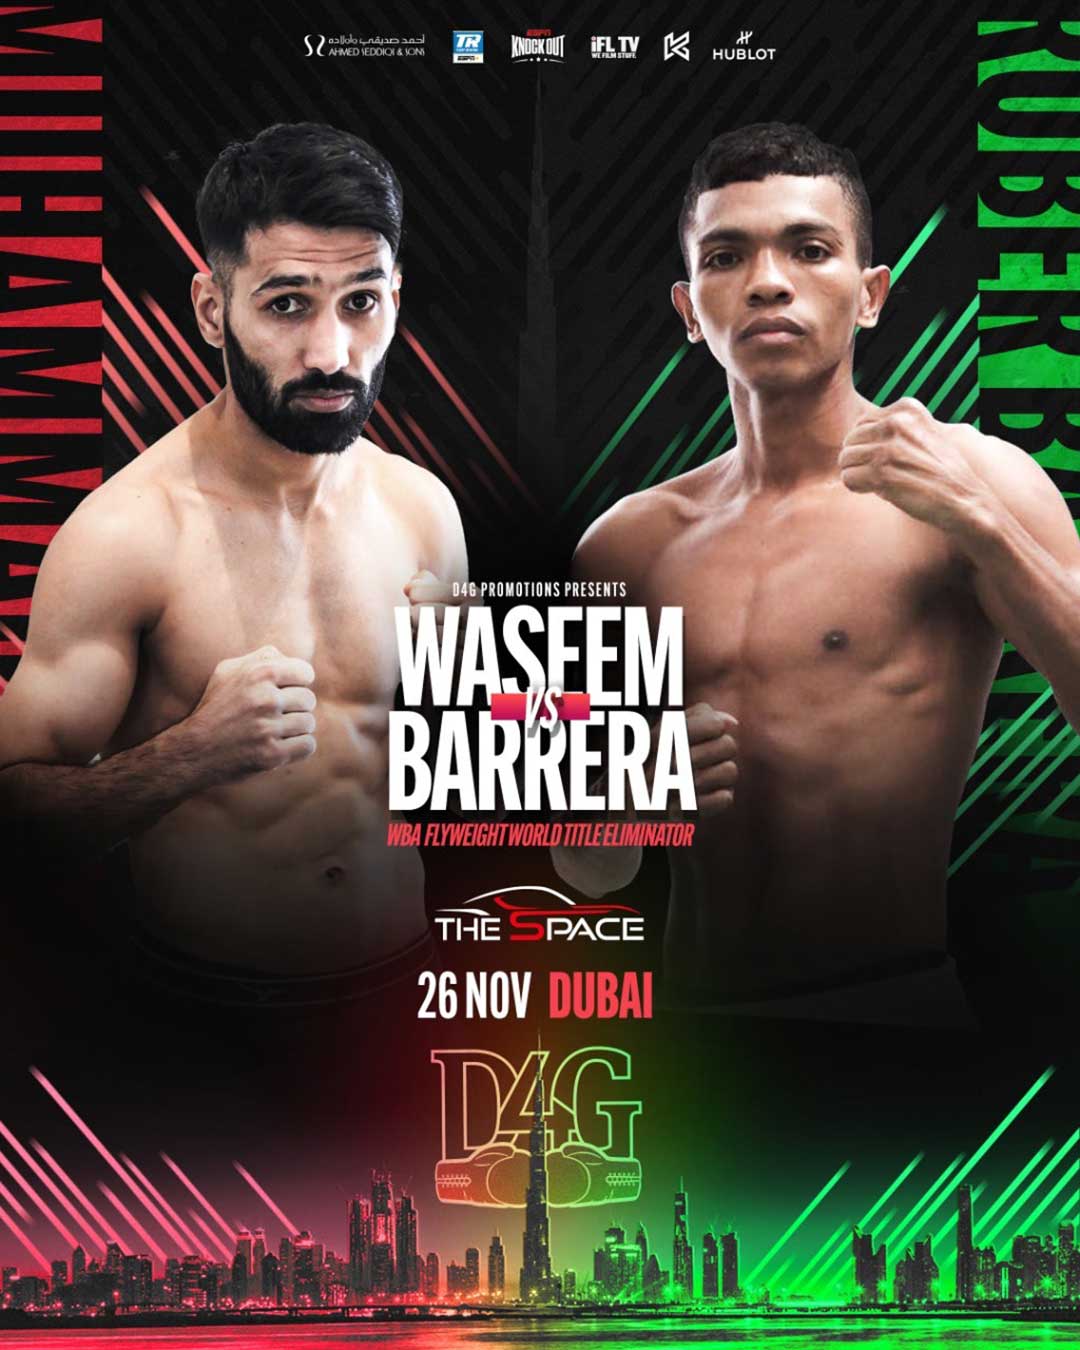 A poster for a Round 10 Boxing match in Dubai.